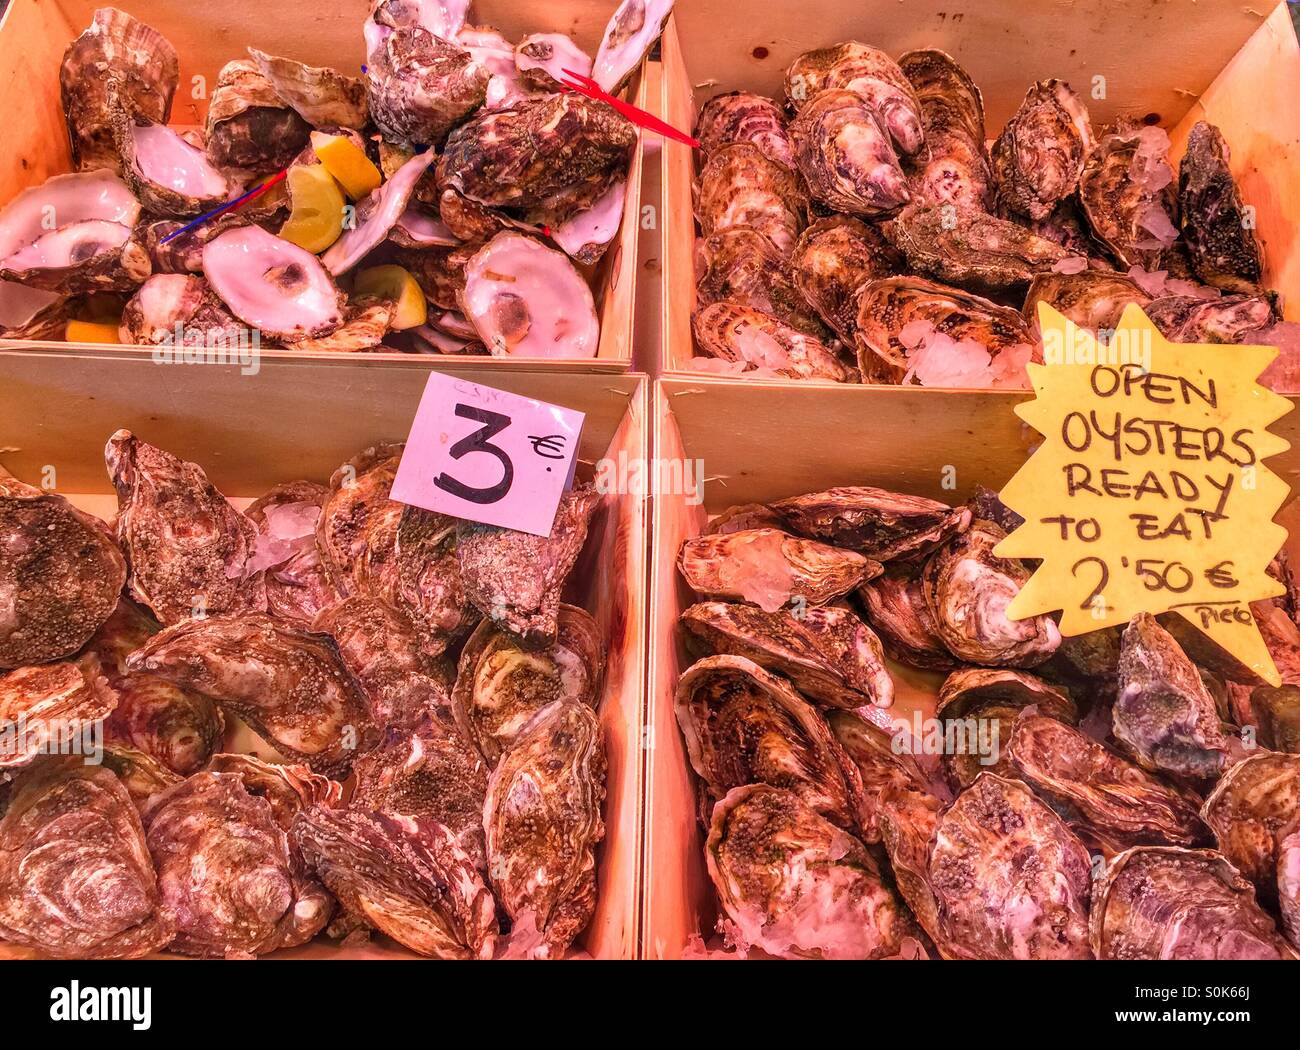 Oysters ready to eat Stock Photo